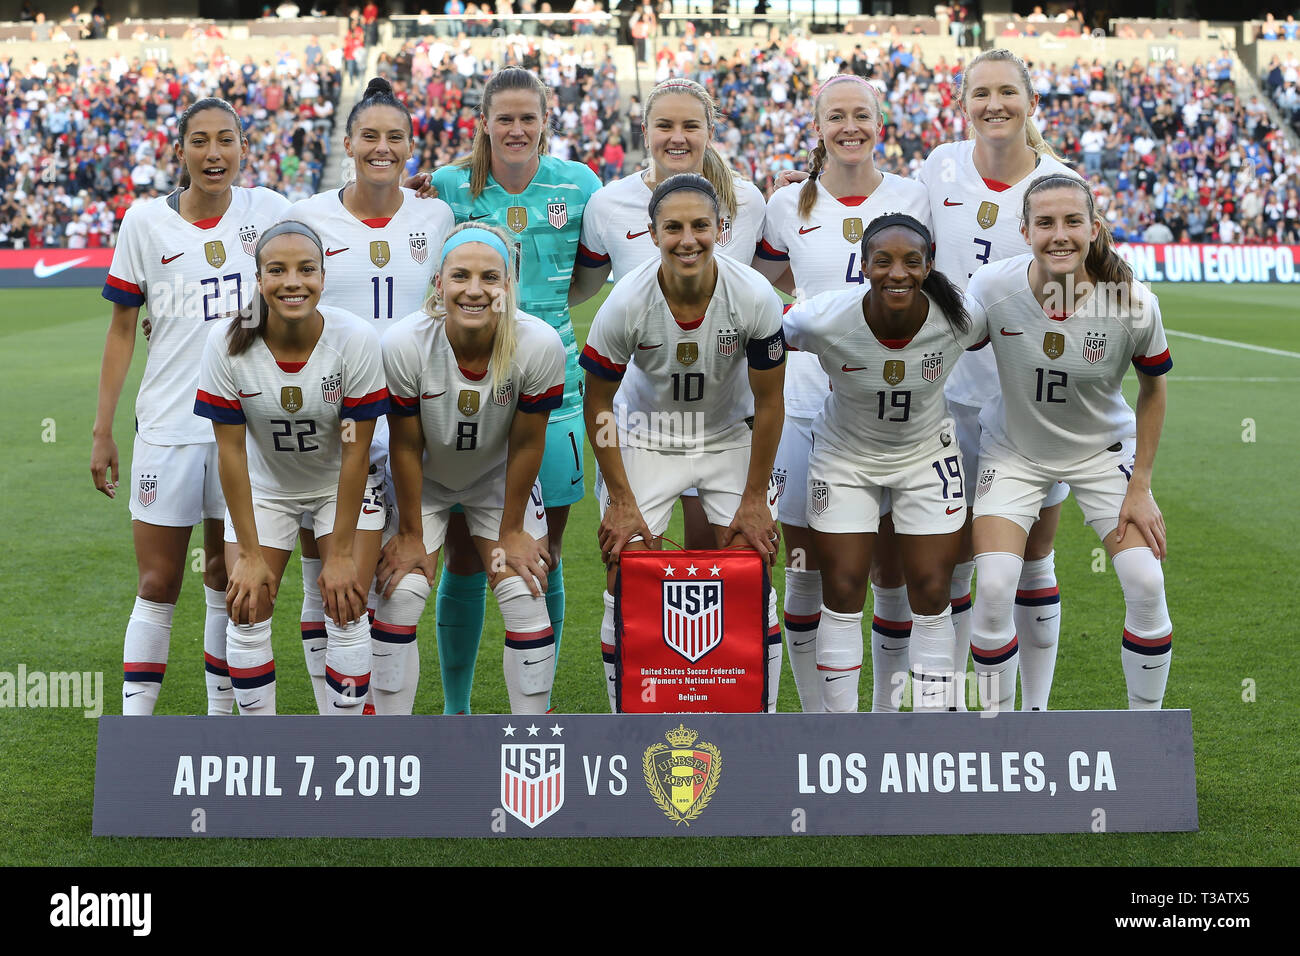 Los Angeles, CA, USA. 7th Apr, 2019. The USA starters pose for their team photo before the game between Belgium and USA at Banc of California Stadium in Los Angeles, CA. USA. (Photo by Peter Joneleit) Credit: csm/Alamy Live News Stock Photo